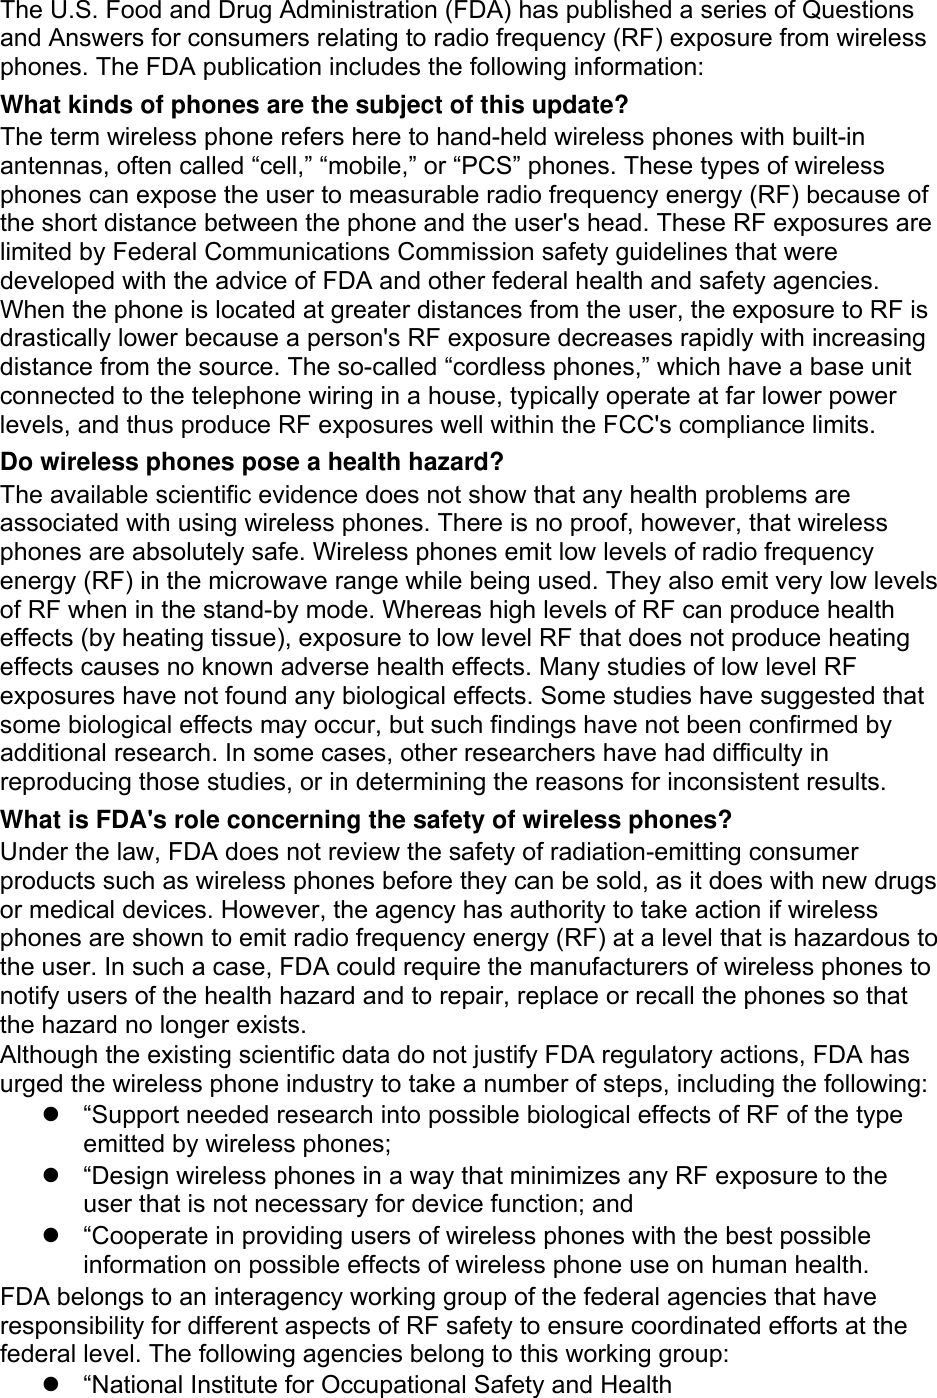 The U.S. Food and Drug Administration (FDA) has published a series of Questions and Answers for consumers relating to radio frequency (RF) exposure from wireless phones. The FDA publication includes the following information: What kinds of phones are the subject of this update? The term wireless phone refers here to hand-held wireless phones with built-in antennas, often called “cell,” “mobile,” or “PCS” phones. These types of wireless phones can expose the user to measurable radio frequency energy (RF) because of the short distance between the phone and the user&apos;s head. These RF exposures are limited by Federal Communications Commission safety guidelines that were developed with the advice of FDA and other federal health and safety agencies. When the phone is located at greater distances from the user, the exposure to RF is drastically lower because a person&apos;s RF exposure decreases rapidly with increasing distance from the source. The so-called “cordless phones,” which have a base unit connected to the telephone wiring in a house, typically operate at far lower power levels, and thus produce RF exposures well within the FCC&apos;s compliance limits. Do wireless phones pose a health hazard? The available scientific evidence does not show that any health problems are associated with using wireless phones. There is no proof, however, that wireless phones are absolutely safe. Wireless phones emit low levels of radio frequency energy (RF) in the microwave range while being used. They also emit very low levels of RF when in the stand-by mode. Whereas high levels of RF can produce health effects (by heating tissue), exposure to low level RF that does not produce heating effects causes no known adverse health effects. Many studies of low level RF exposures have not found any biological effects. Some studies have suggested that some biological effects may occur, but such findings have not been confirmed by additional research. In some cases, other researchers have had difficulty in reproducing those studies, or in determining the reasons for inconsistent results. What is FDA&apos;s role concerning the safety of wireless phones? Under the law, FDA does not review the safety of radiation-emitting consumer products such as wireless phones before they can be sold, as it does with new drugs or medical devices. However, the agency has authority to take action if wireless phones are shown to emit radio frequency energy (RF) at a level that is hazardous to the user. In such a case, FDA could require the manufacturers of wireless phones to notify users of the health hazard and to repair, replace or recall the phones so that the hazard no longer exists. Although the existing scientific data do not justify FDA regulatory actions, FDA has urged the wireless phone industry to take a number of steps, including the following:   “Support needed research into possible biological effects of RF of the type emitted by wireless phones;   “Design wireless phones in a way that minimizes any RF exposure to the user that is not necessary for device function; and   “Cooperate in providing users of wireless phones with the best possible information on possible effects of wireless phone use on human health. FDA belongs to an interagency working group of the federal agencies that have responsibility for different aspects of RF safety to ensure coordinated efforts at the federal level. The following agencies belong to this working group:   “National Institute for Occupational Safety and Health 